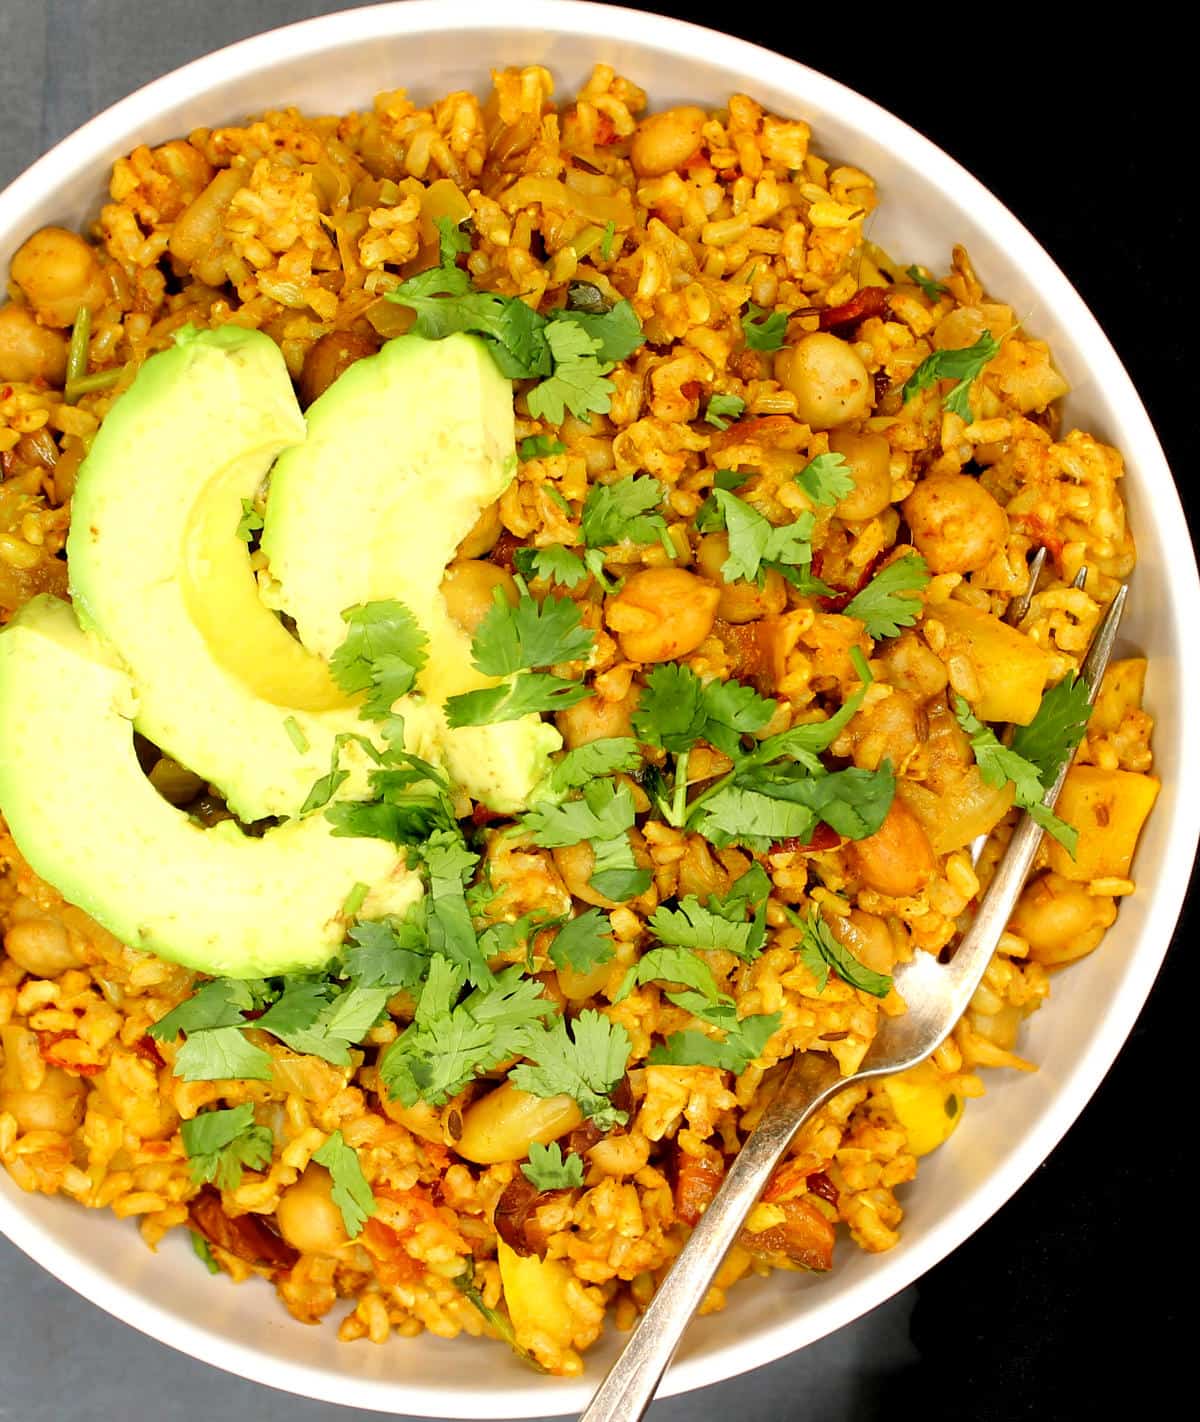 Overhead partial photo of a chickpea rice bowl with avocado, cilantro and a fork.